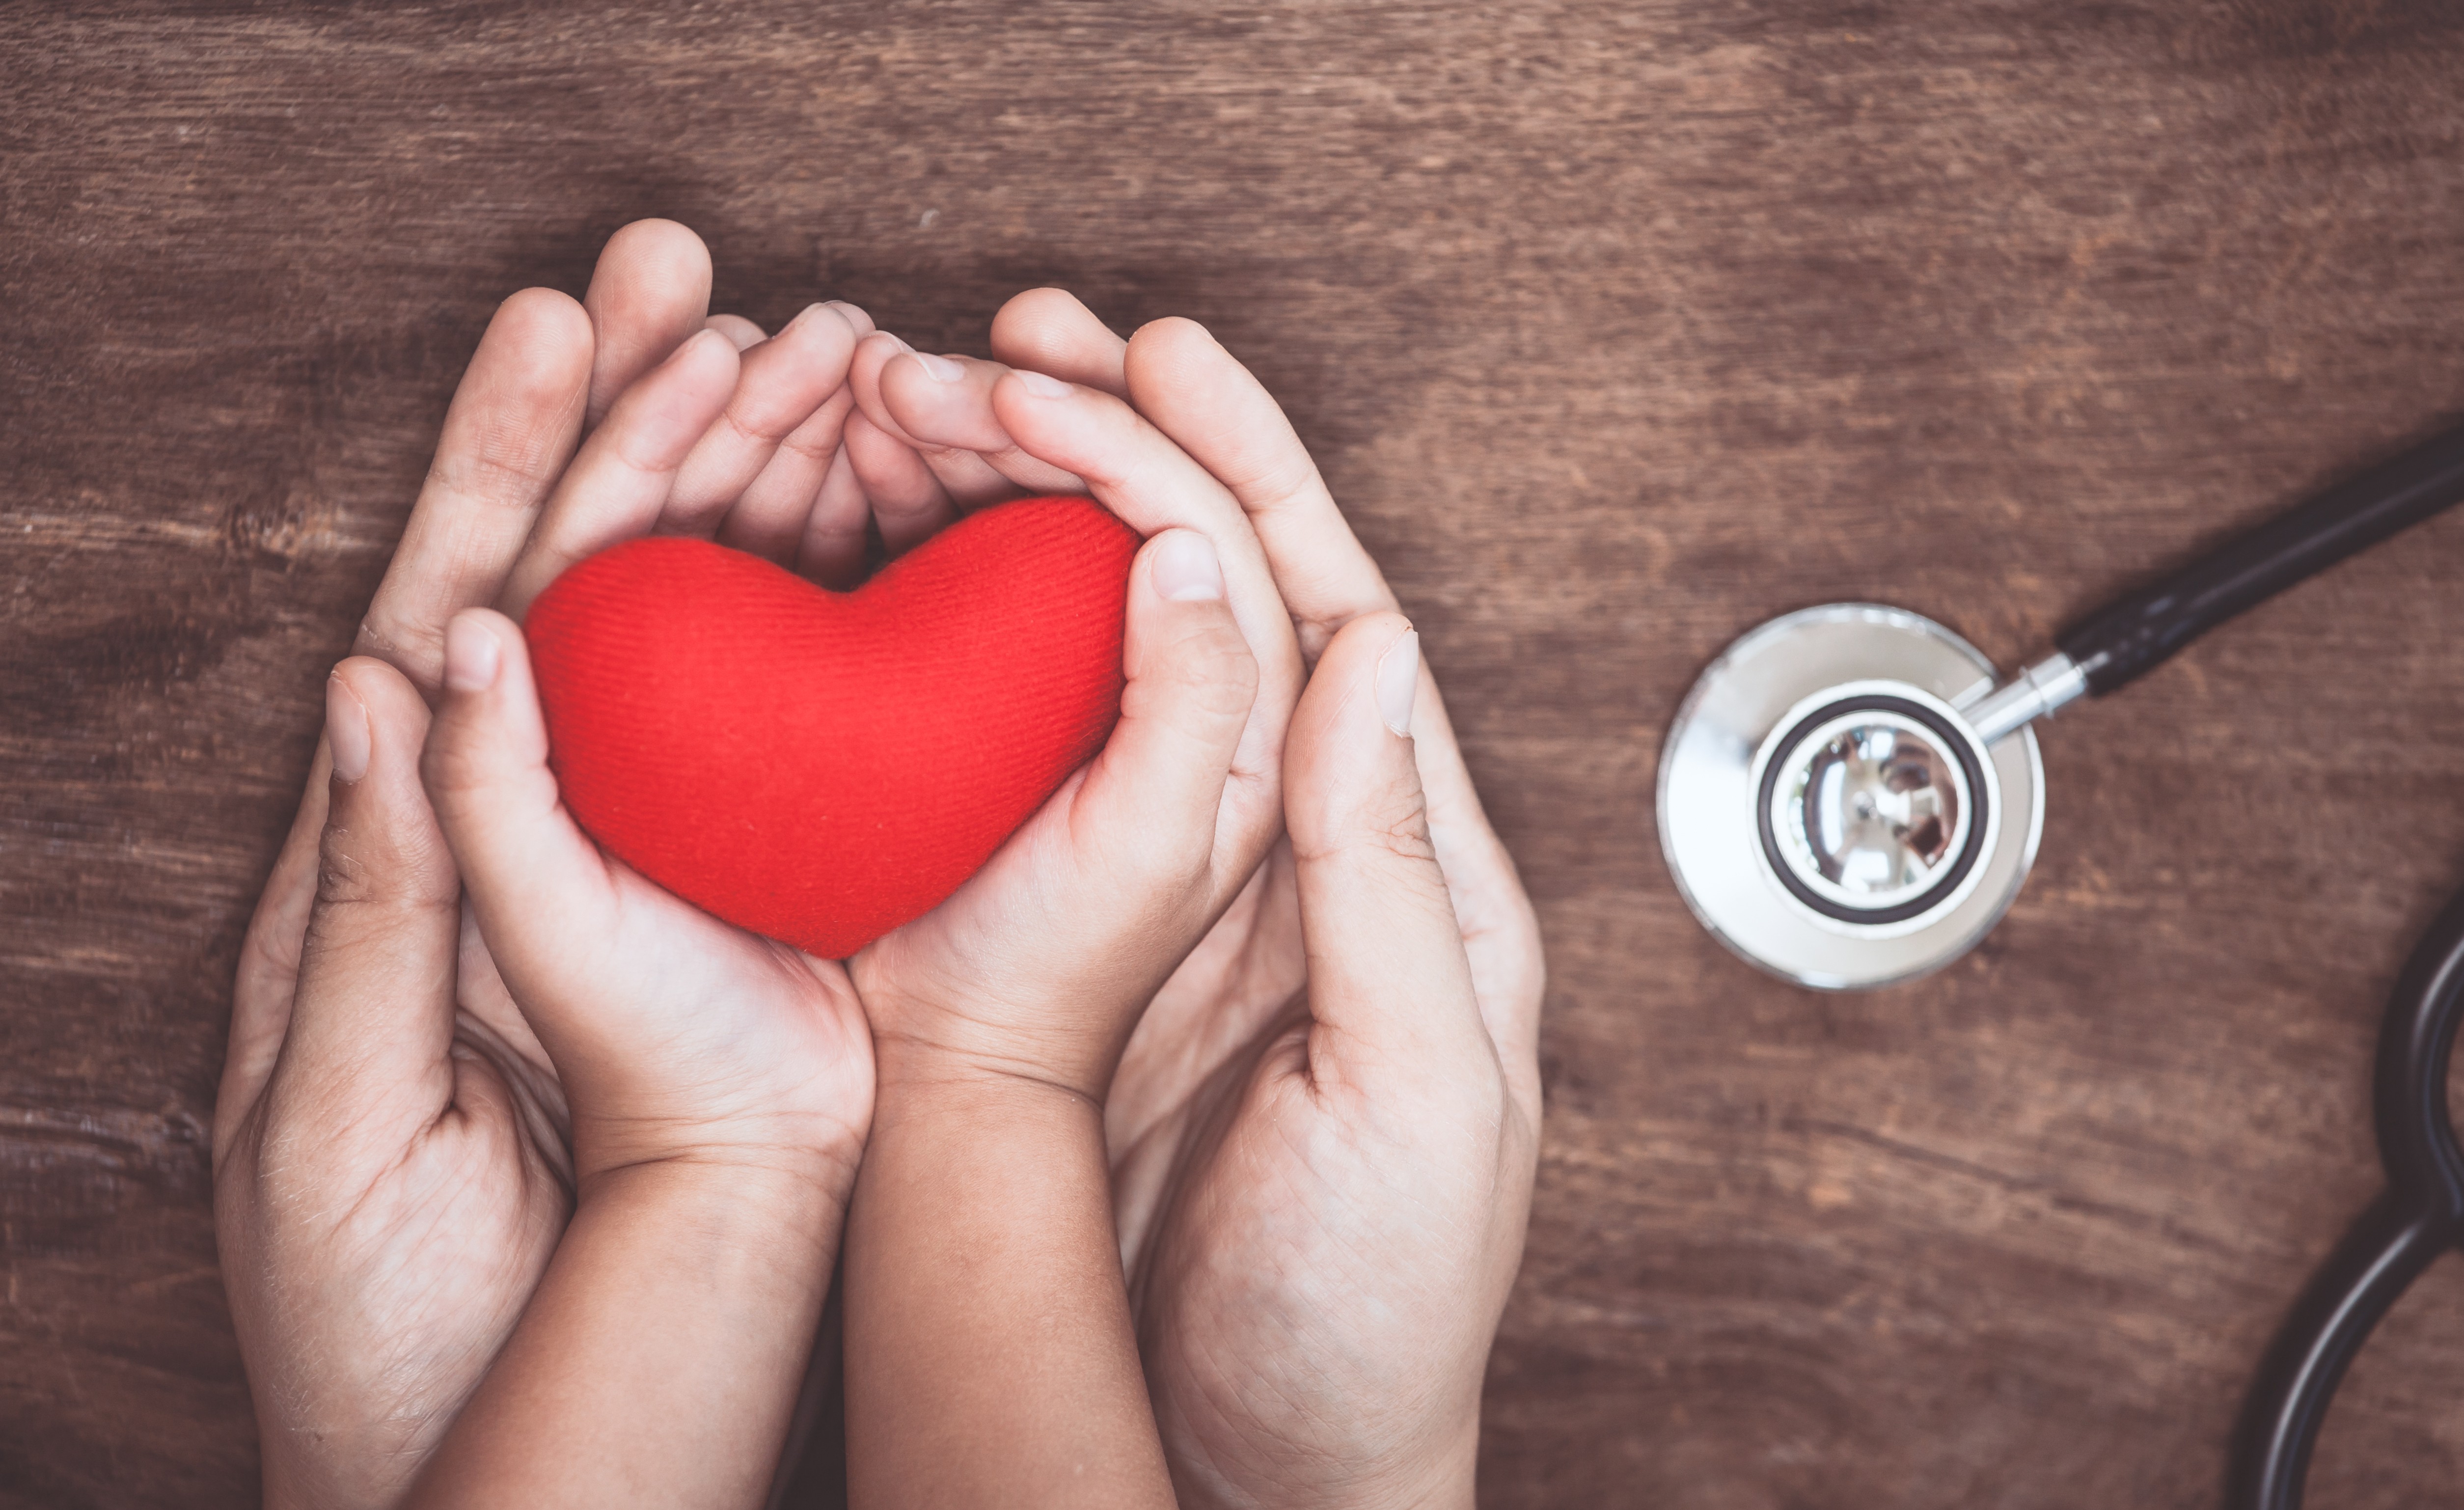 The American Psychological Association says patients who have come close to death during a heart attack should enlist the support of friends, family, and work colleagues.